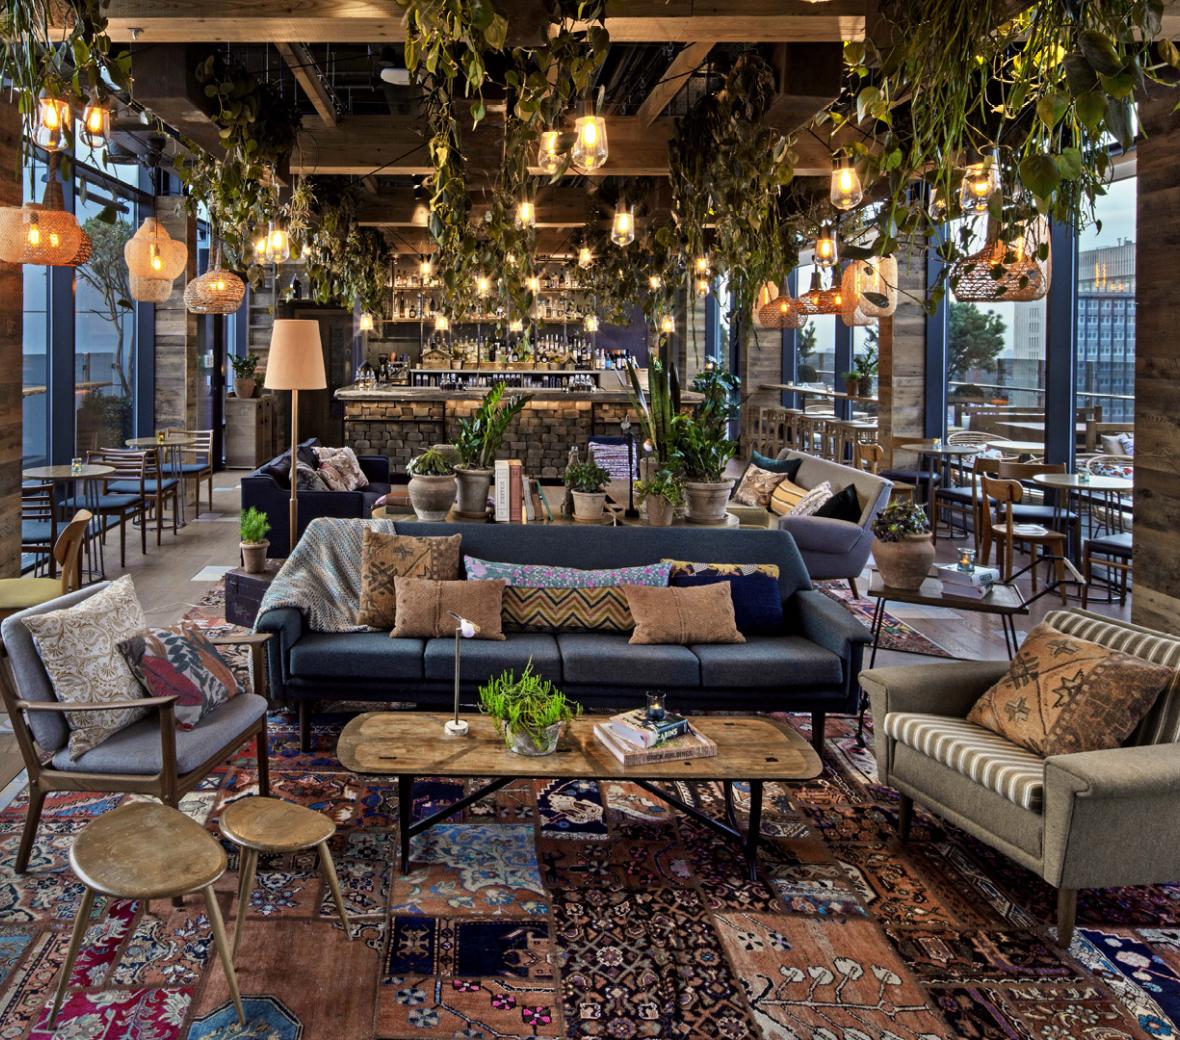 The Nest in Treehouse London